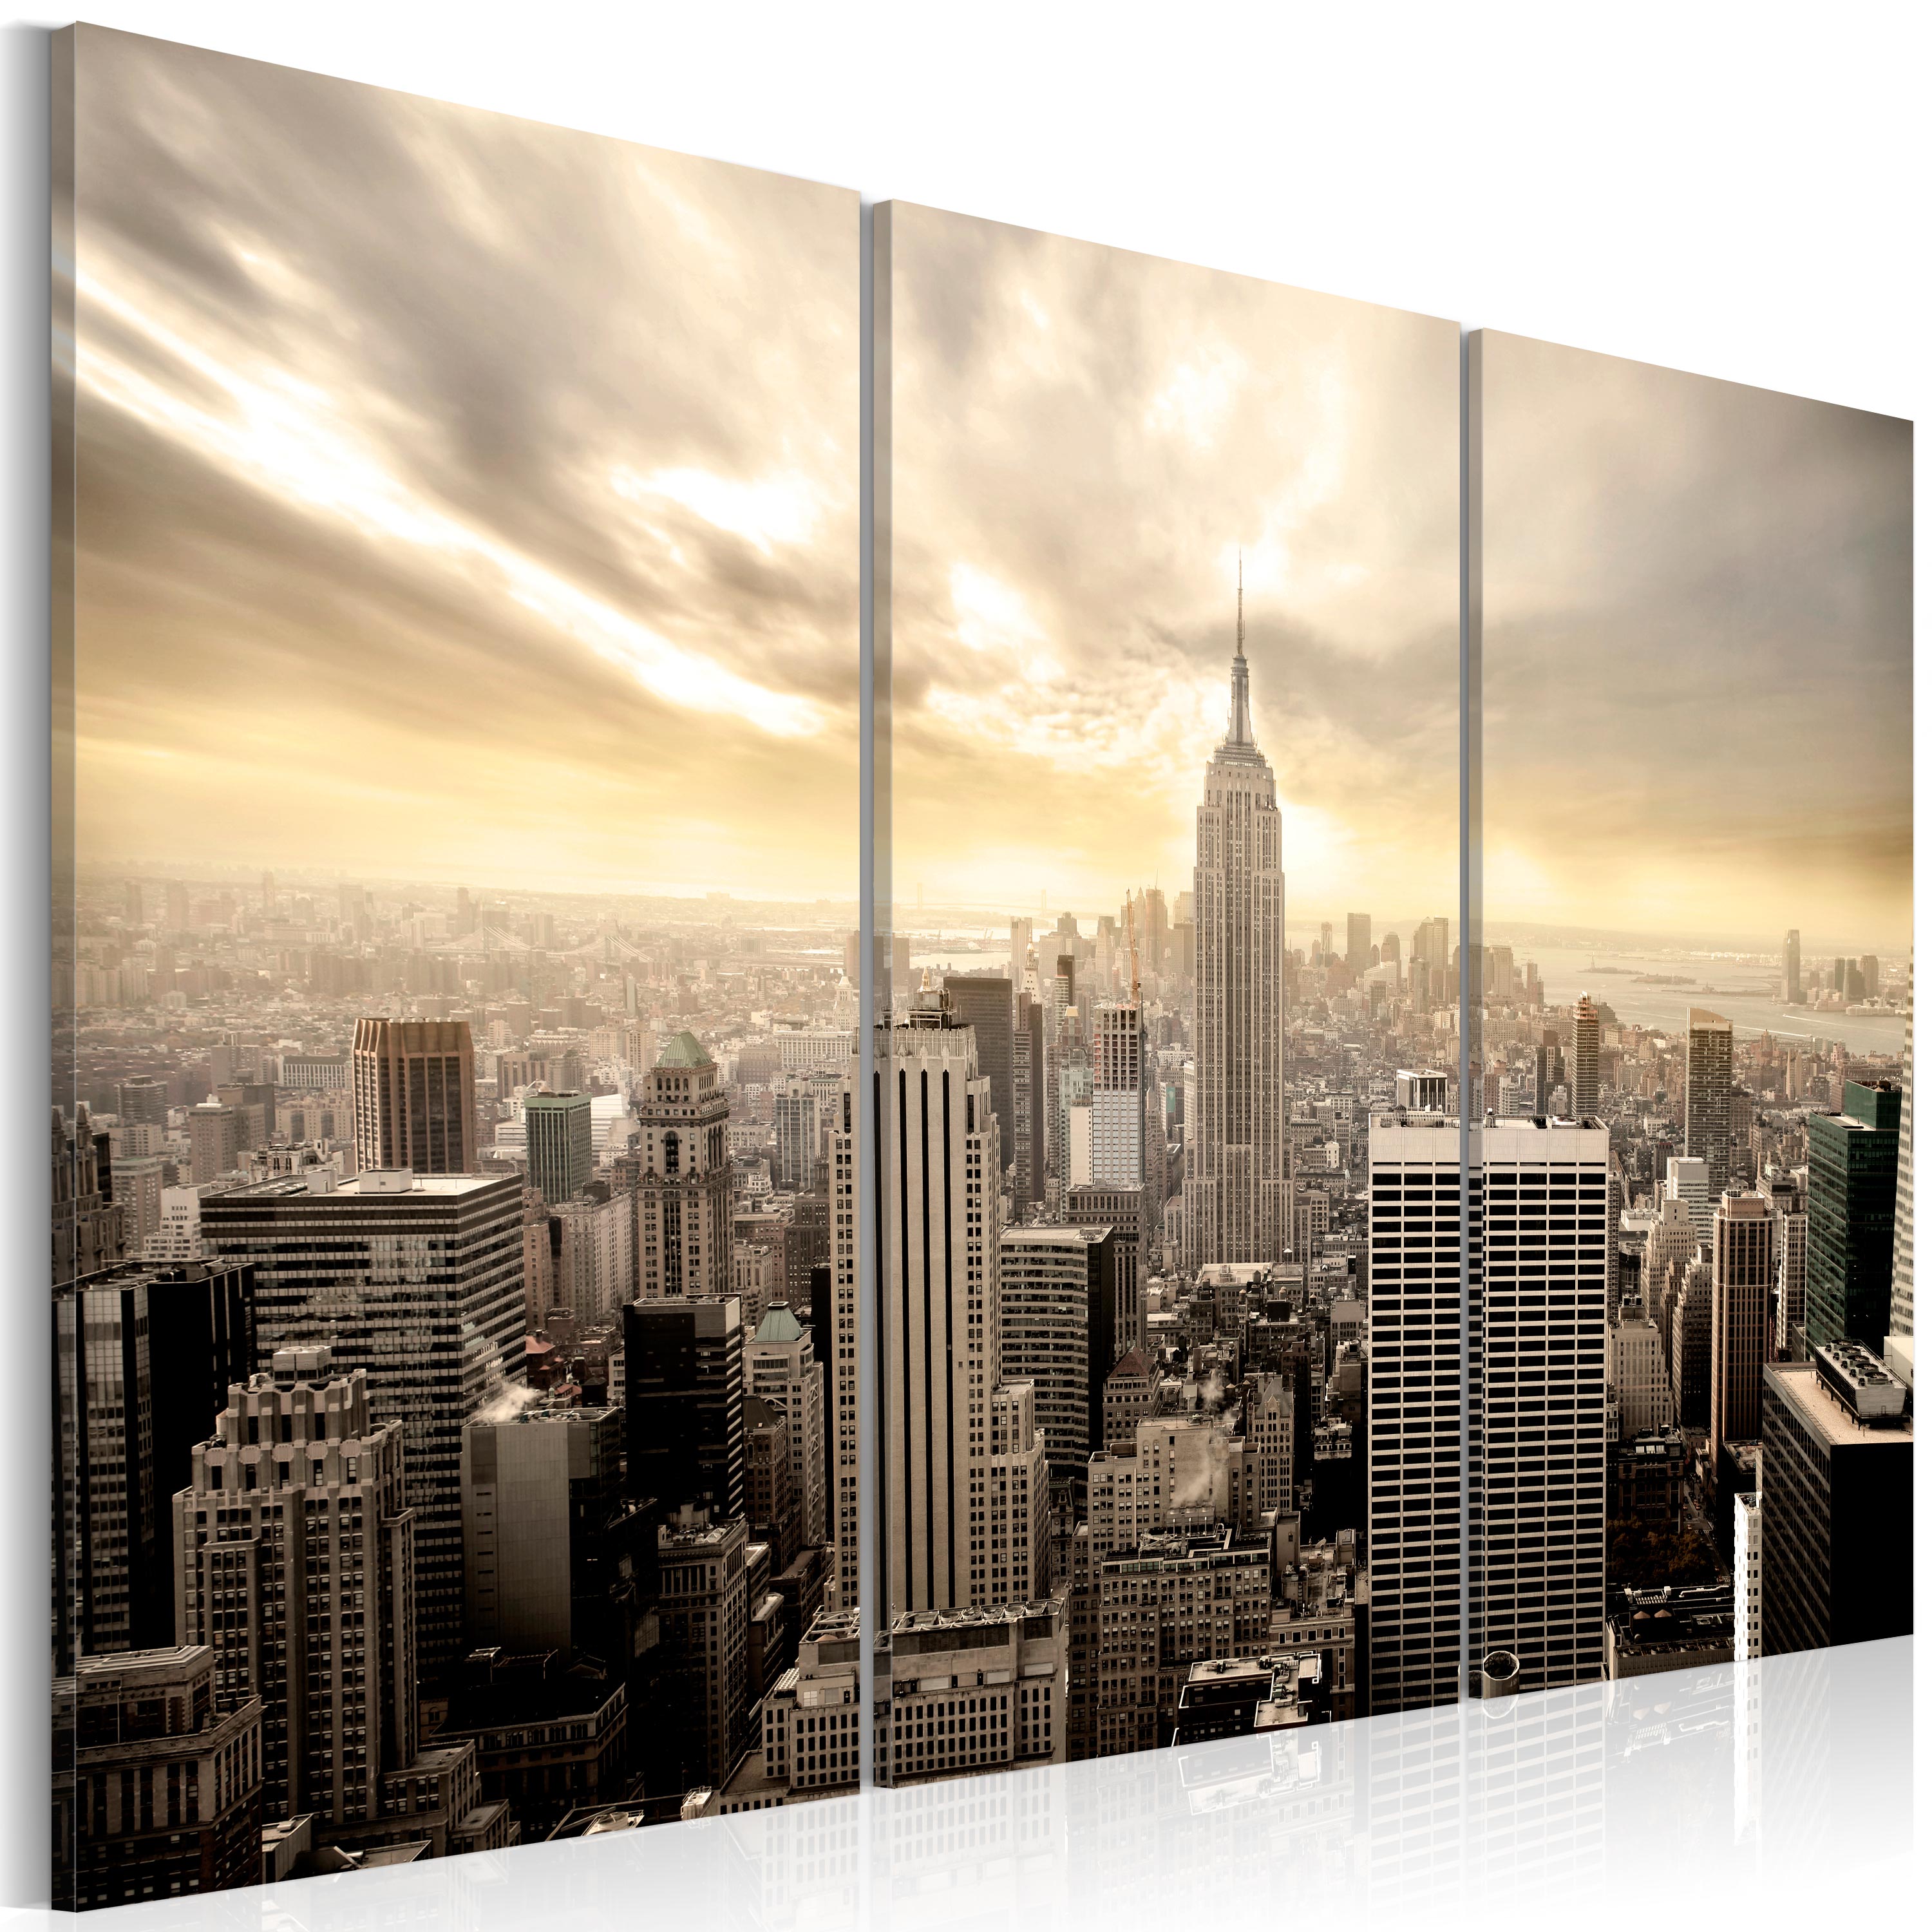 Canvas Print New York City Framed Wall Art Picture Photo Image 9020130 Ebay